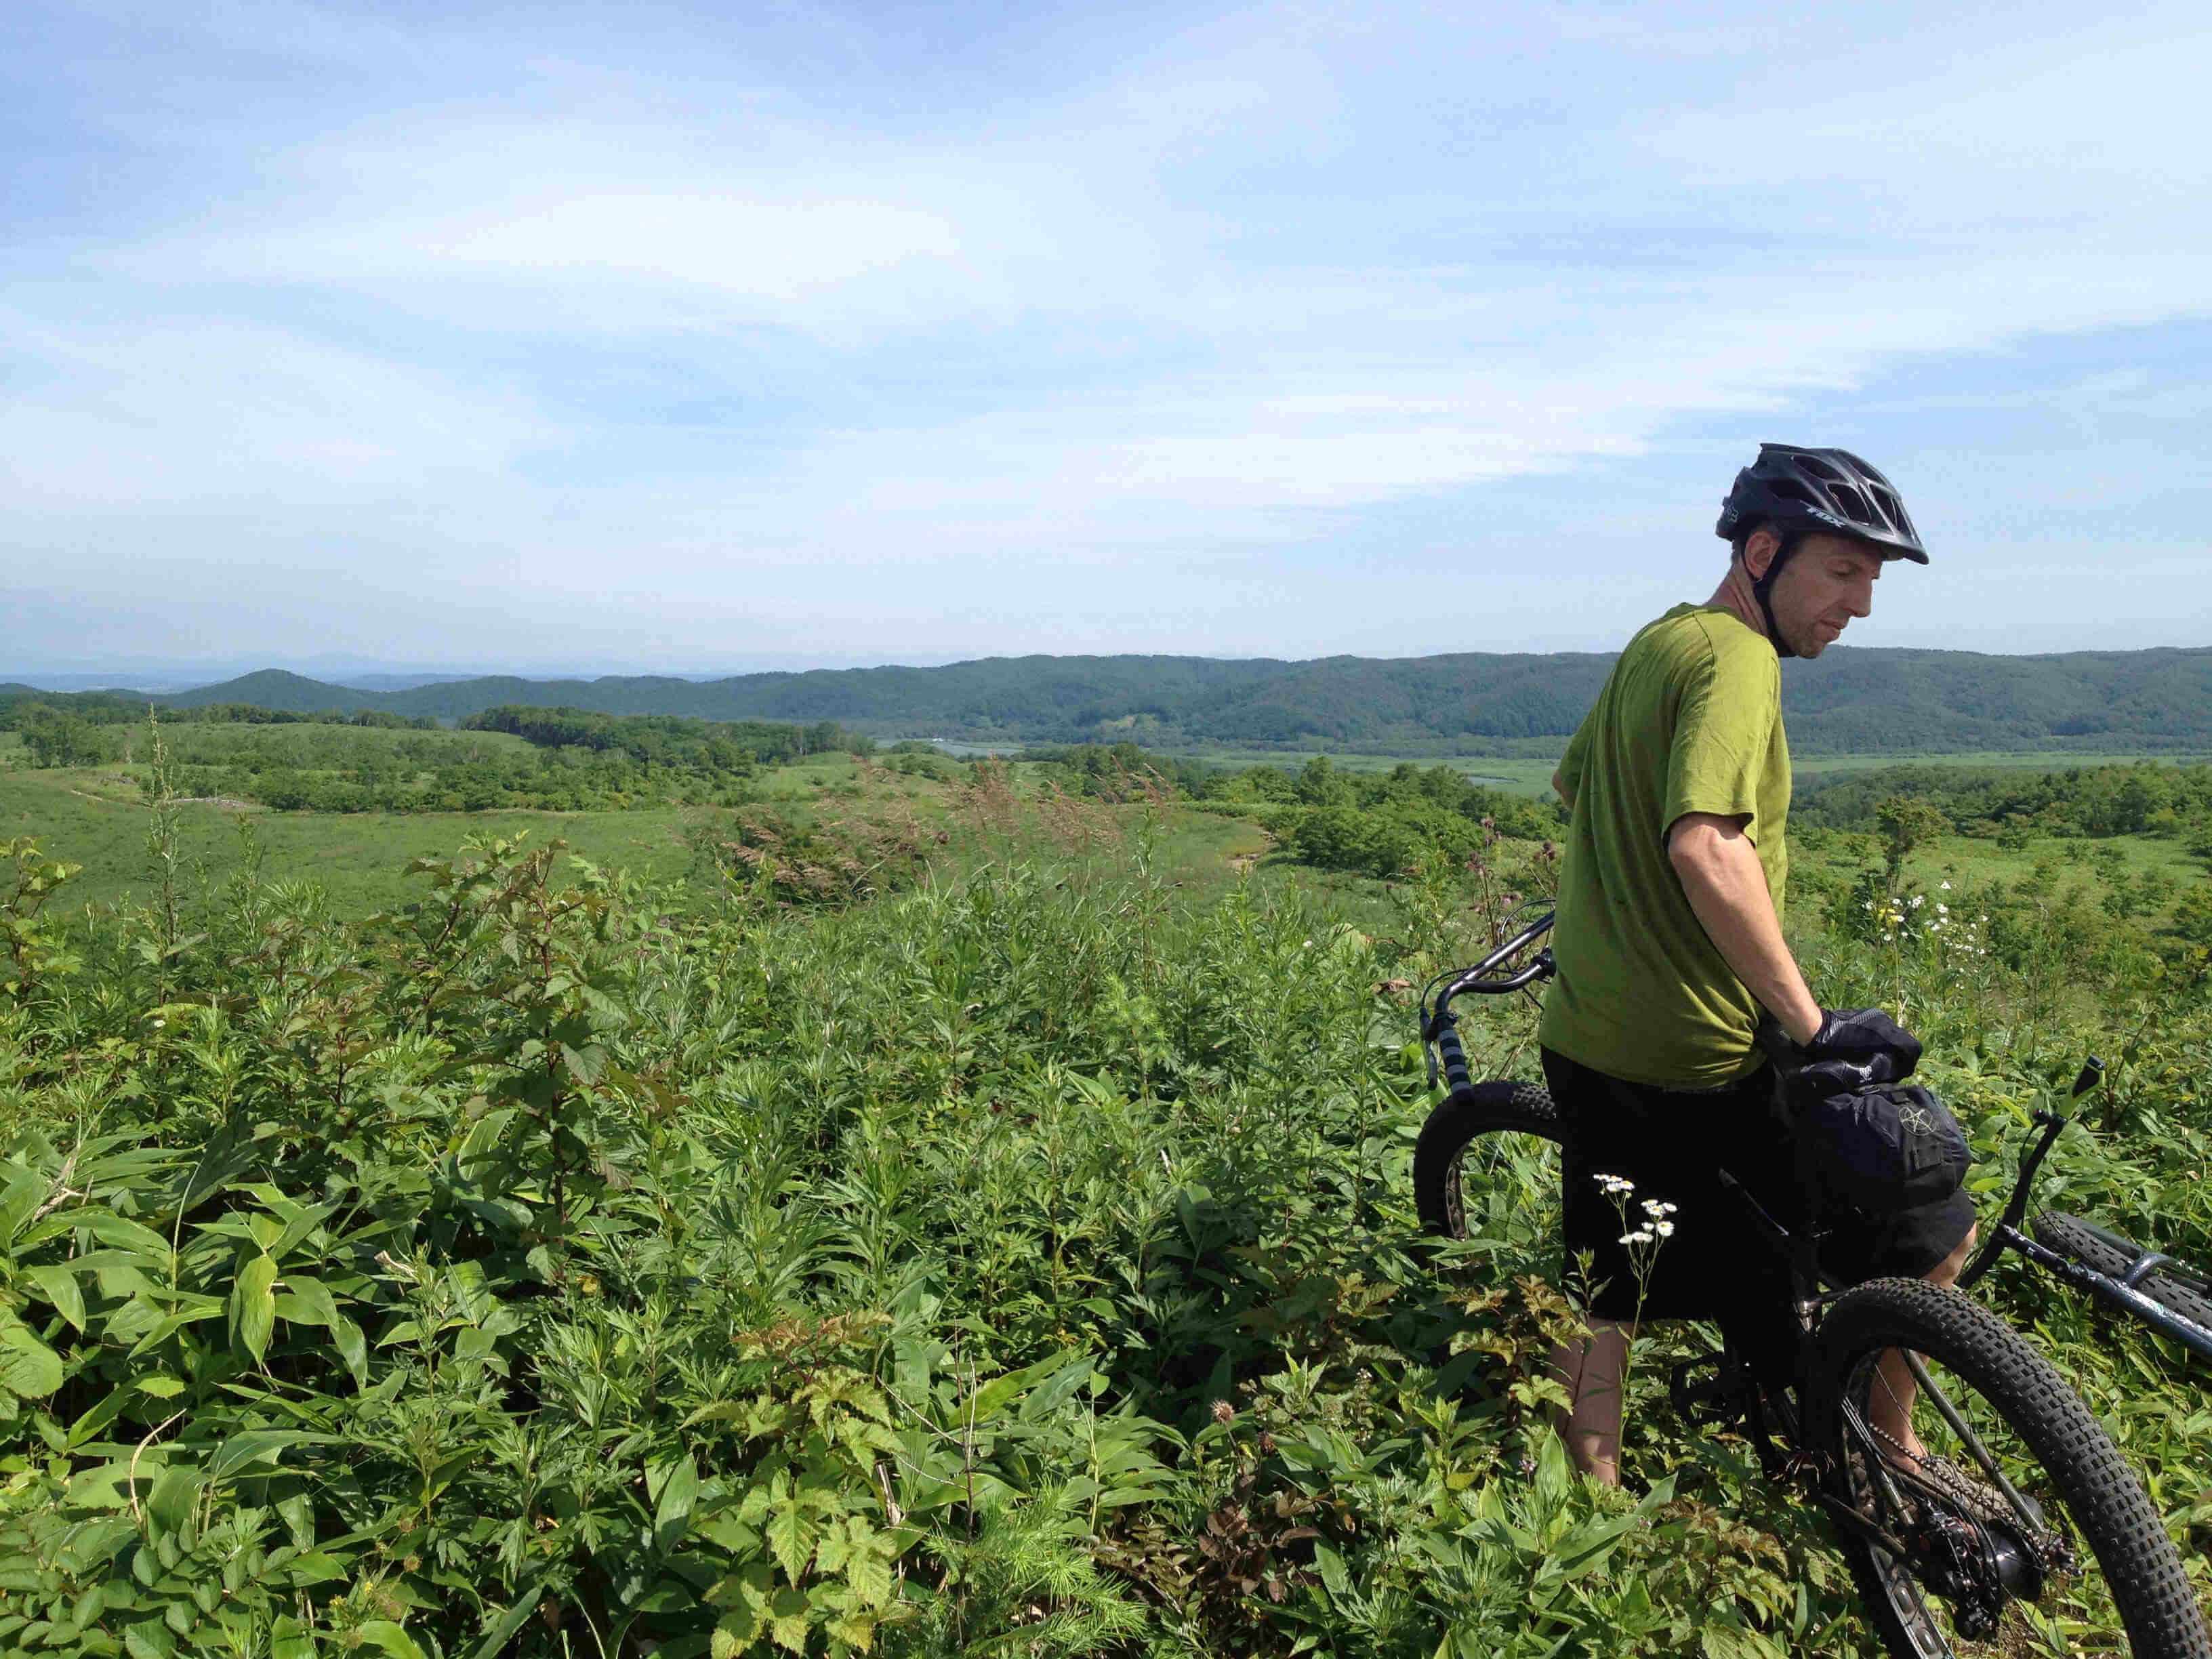 Rear, left side view of a cyclist, standing over their bike, in a field of tall, green weeds